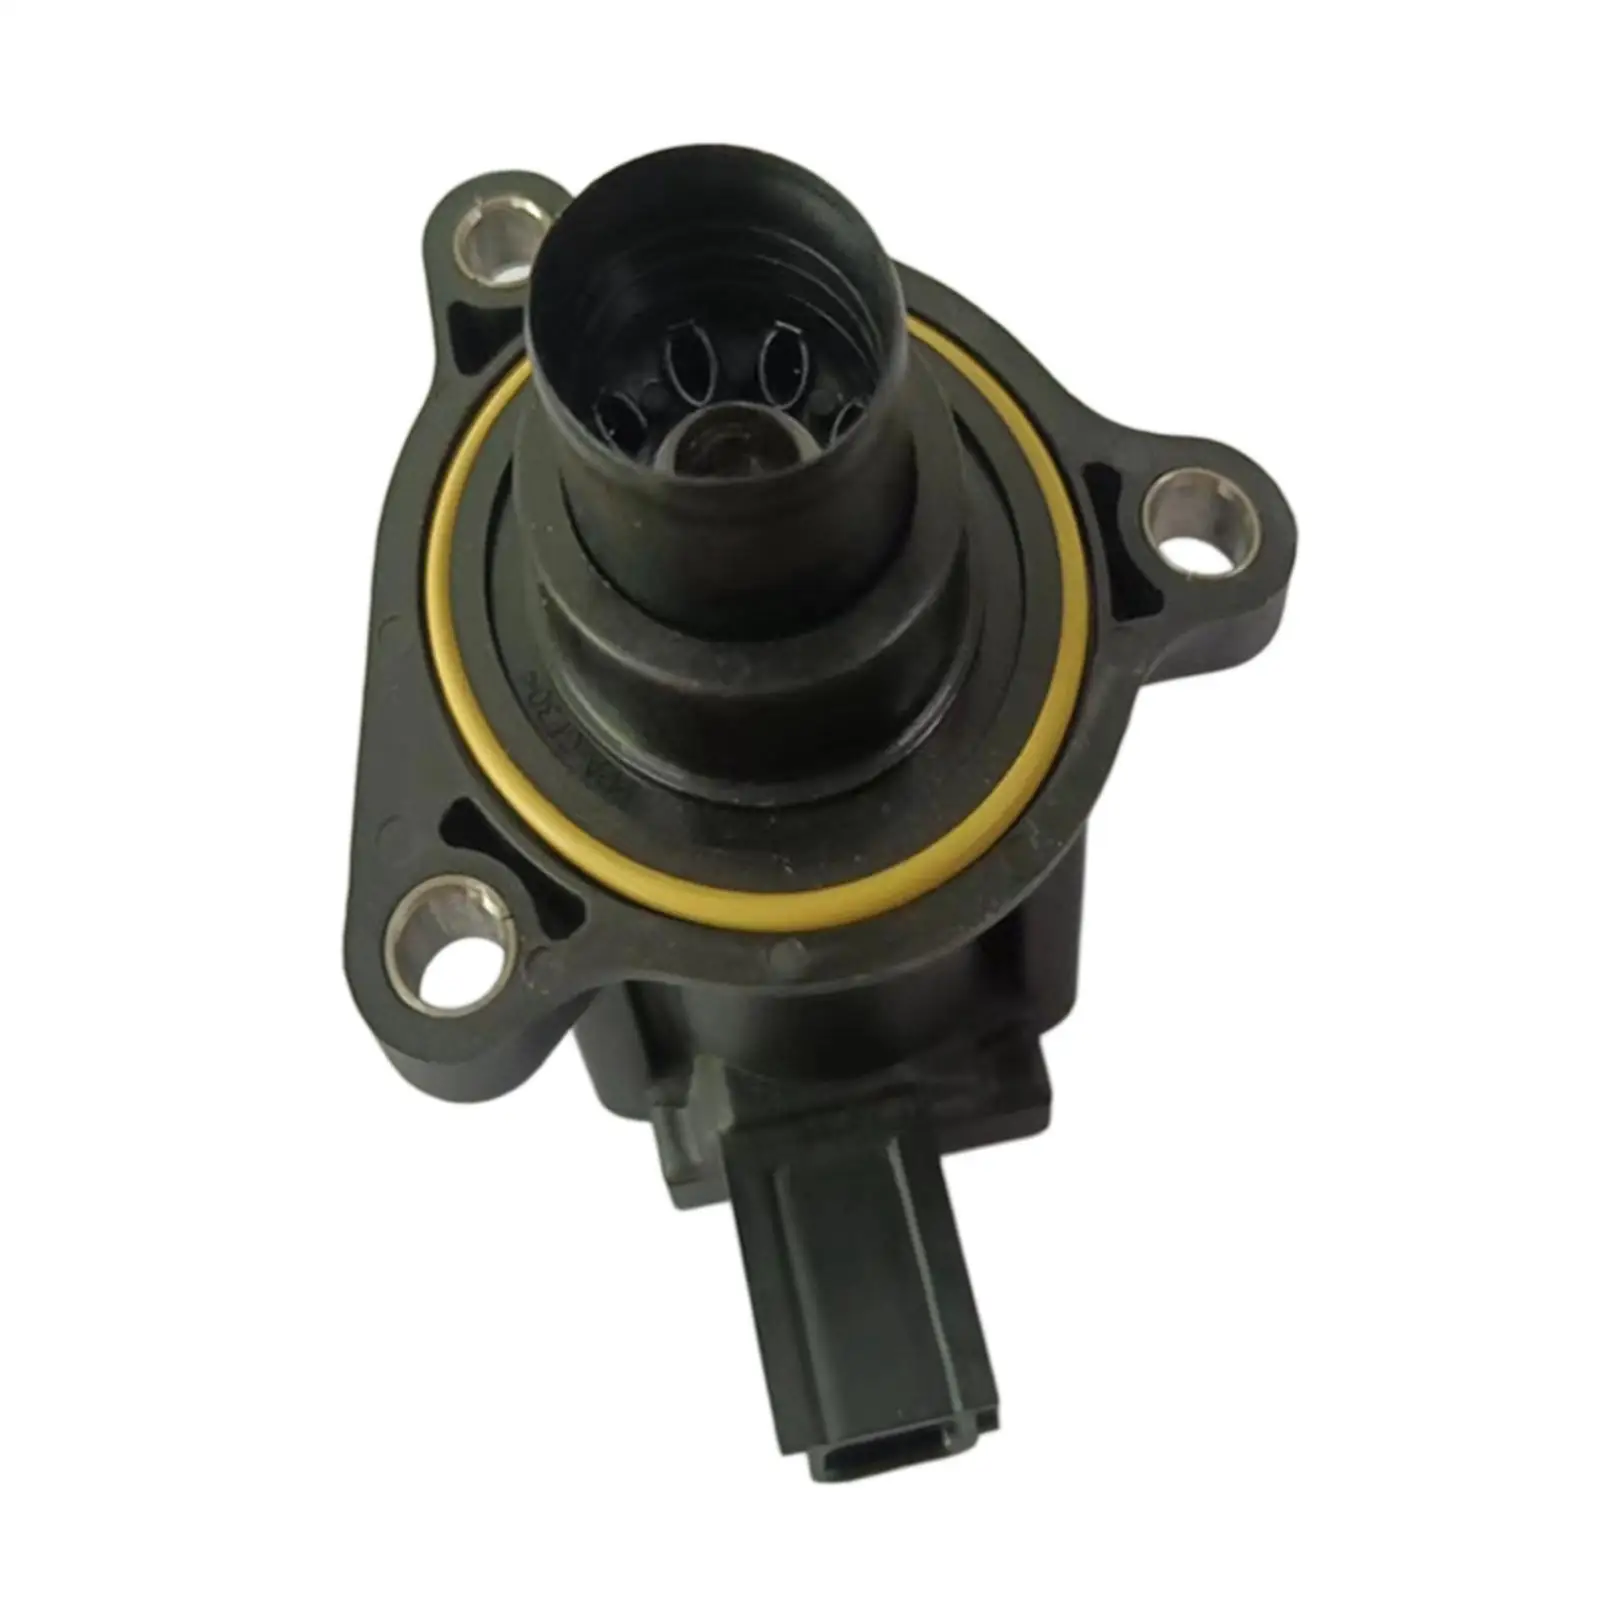 Turbocharger Solenoid Valve Replacement Parts, 144839204R ,Car Accessory for 1.2